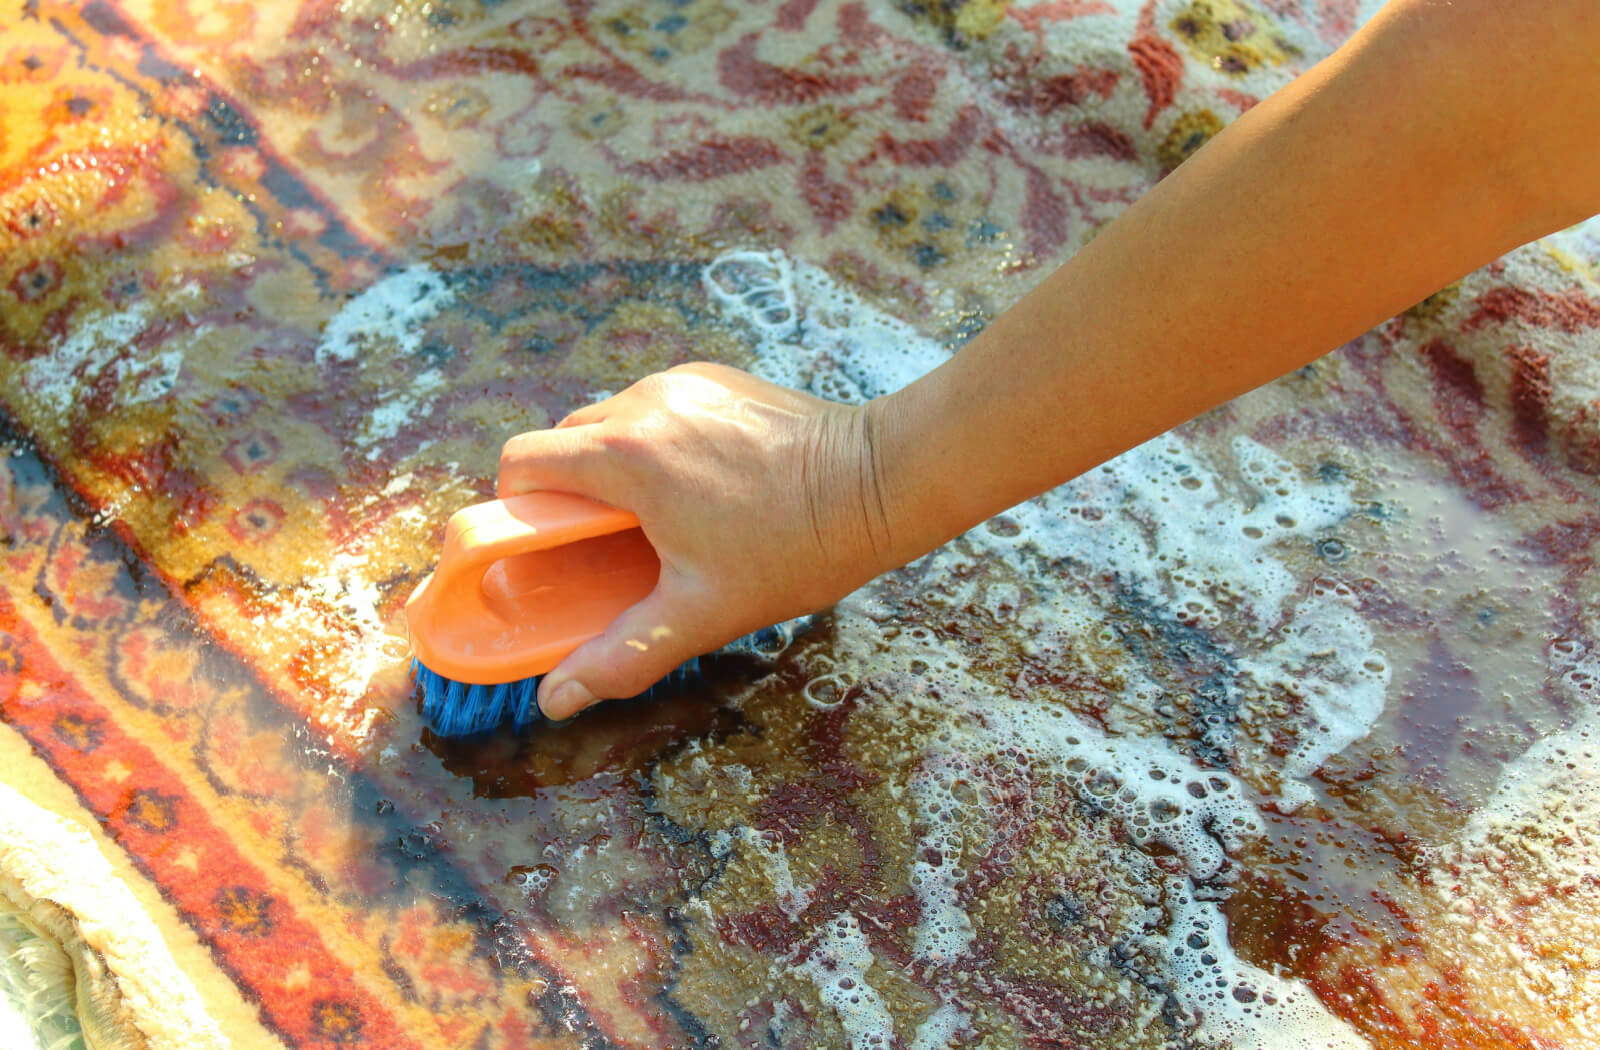 A person's hand as they manually scrub a rug with a thick-bristled brush and soapy water.